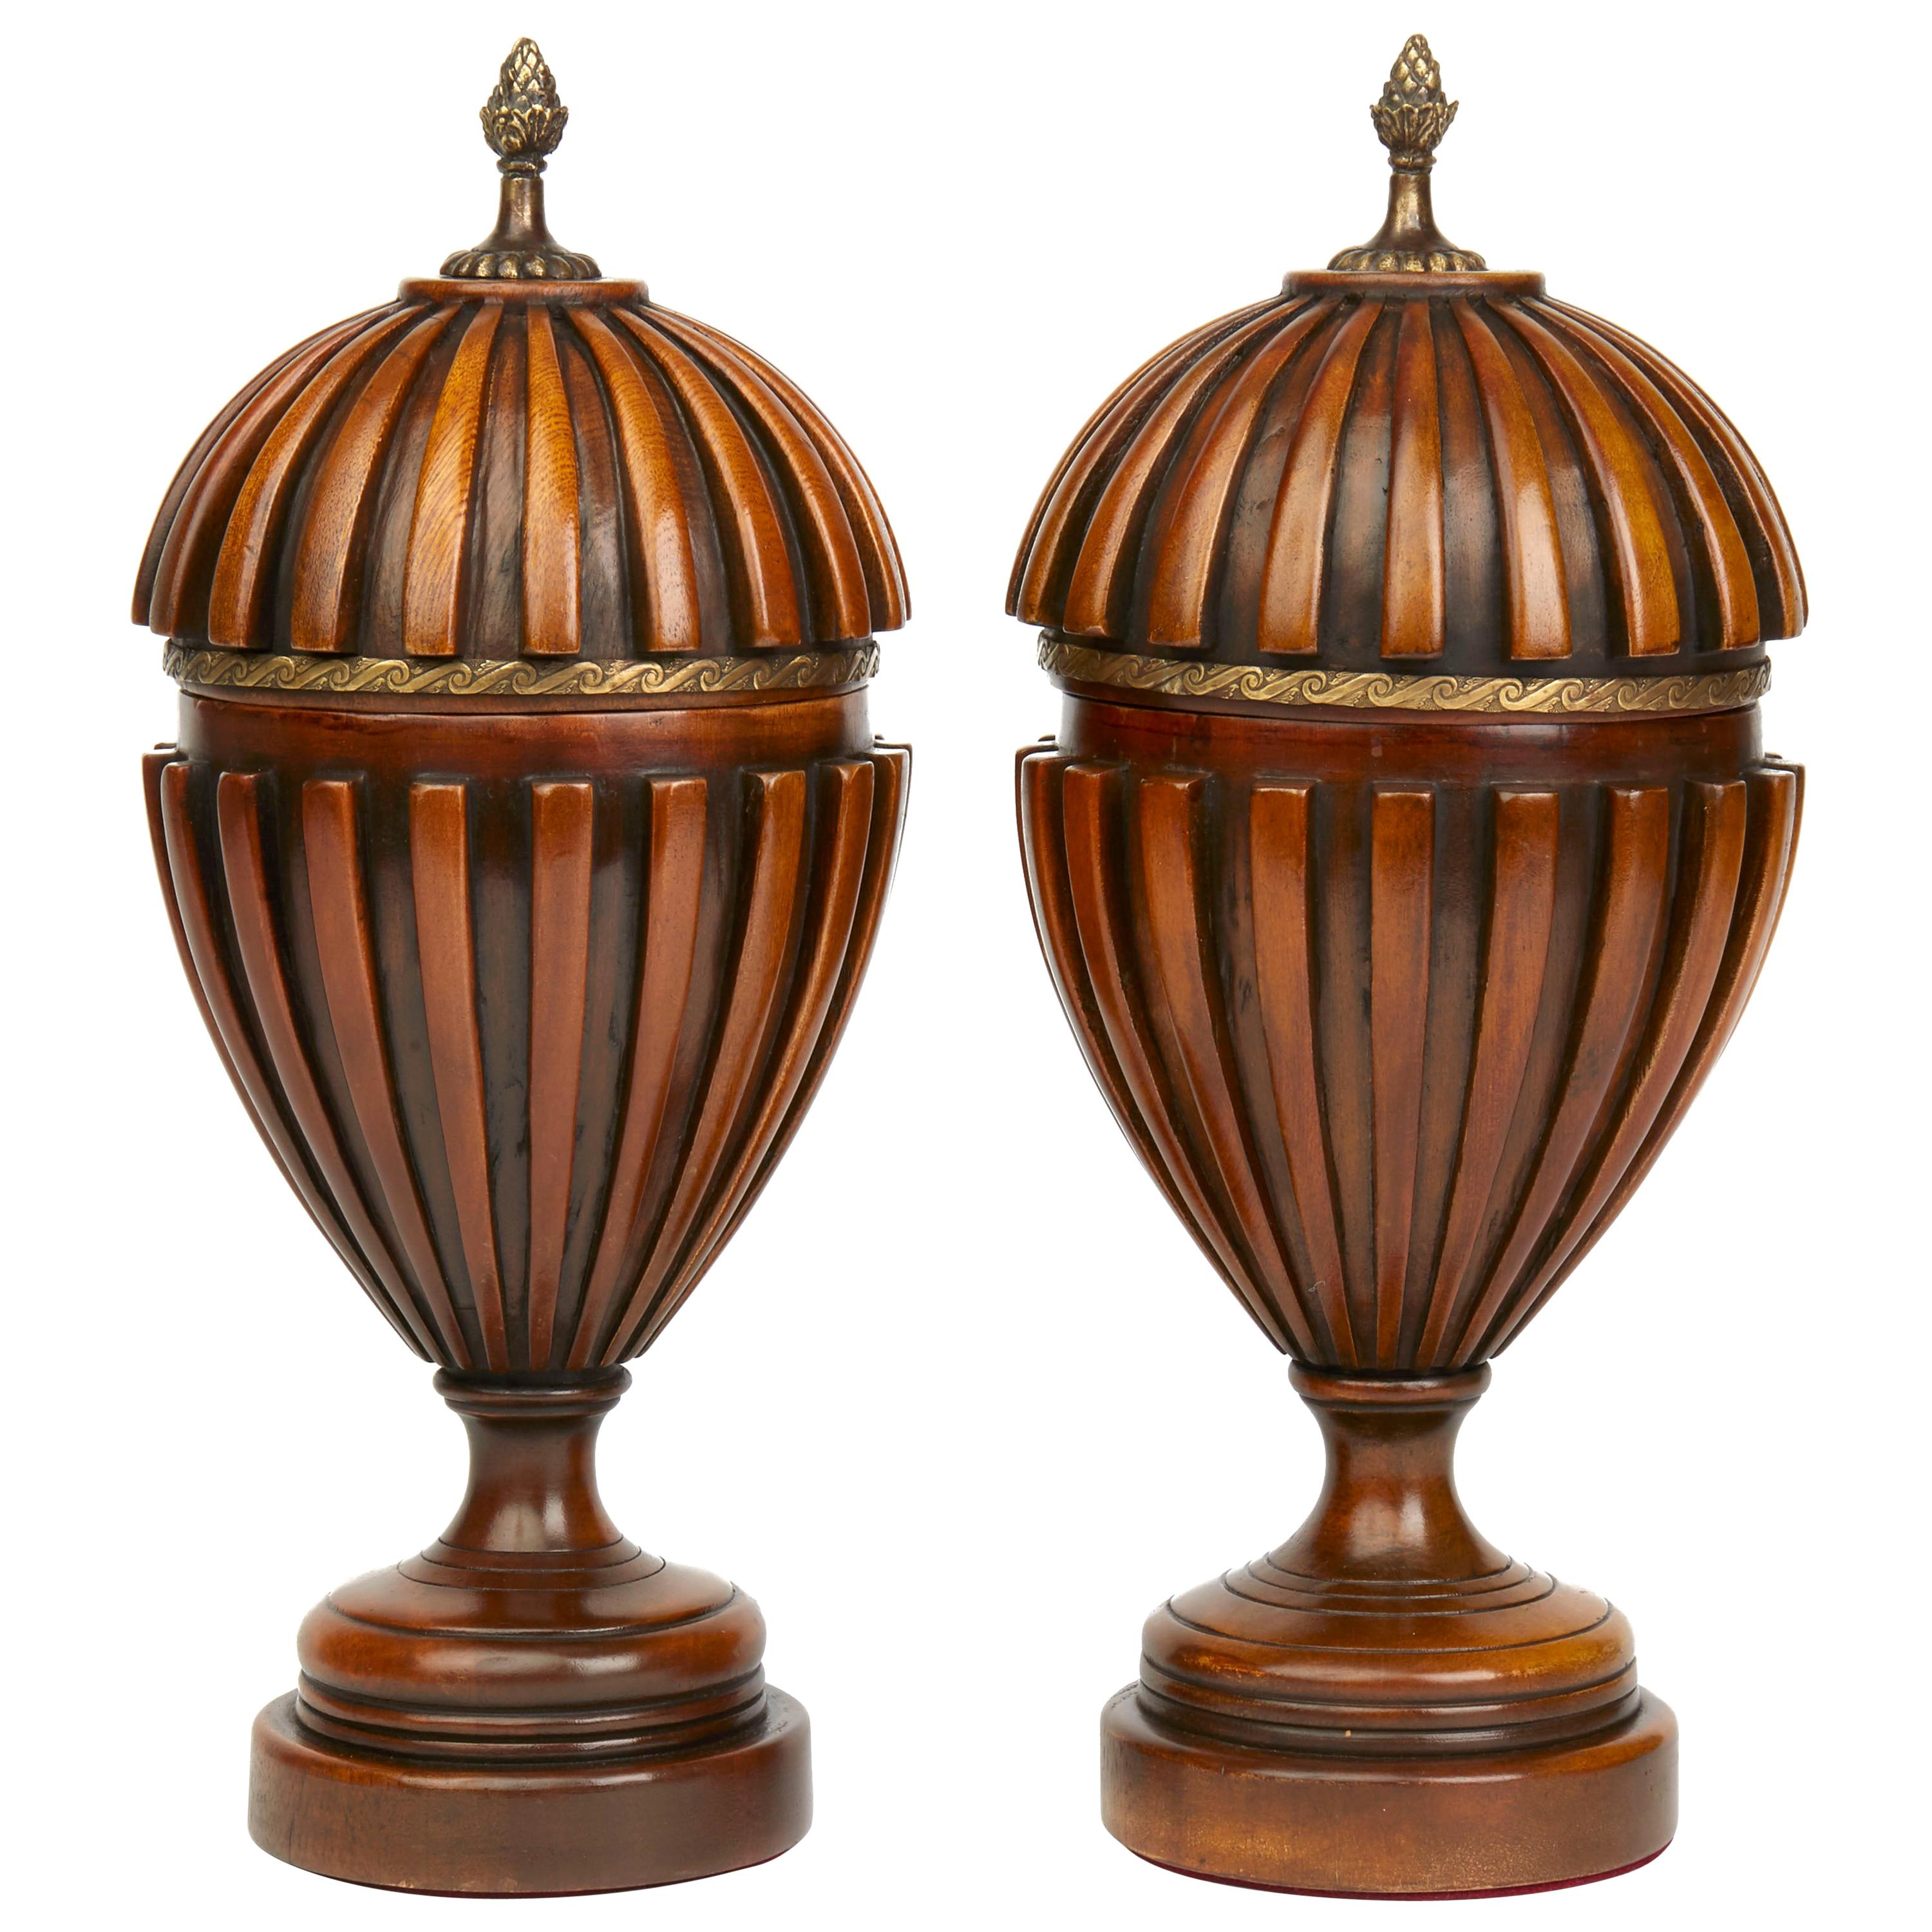 Pair of Adam Style Carved Wood Lidded Urns, circa 1950